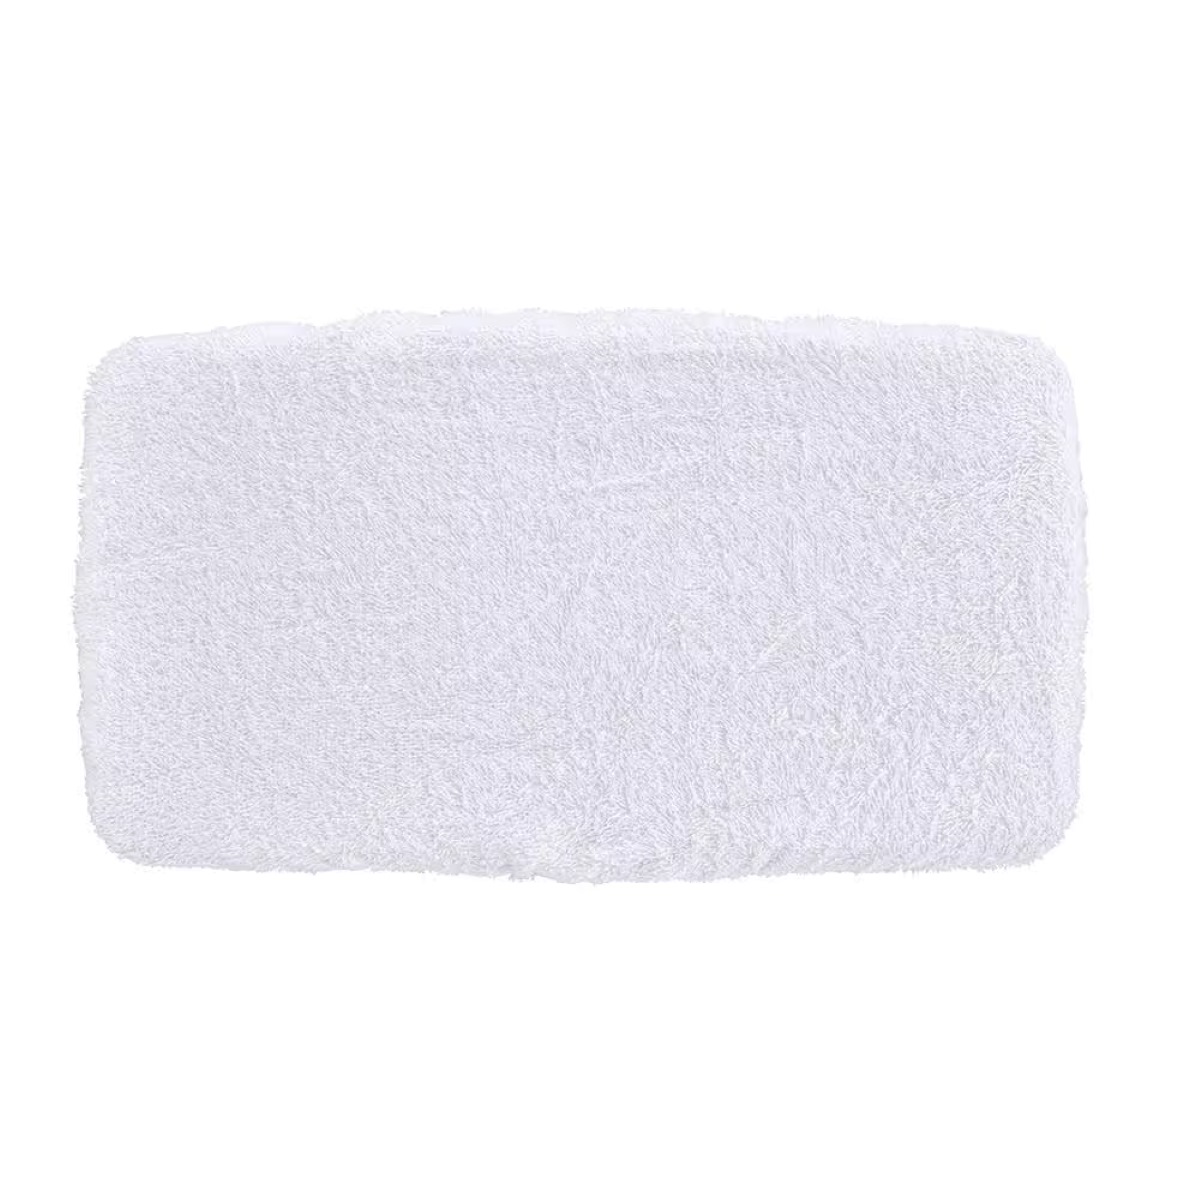 Libman All-Purpose Machine Washable 100% Cotton Terry Towels